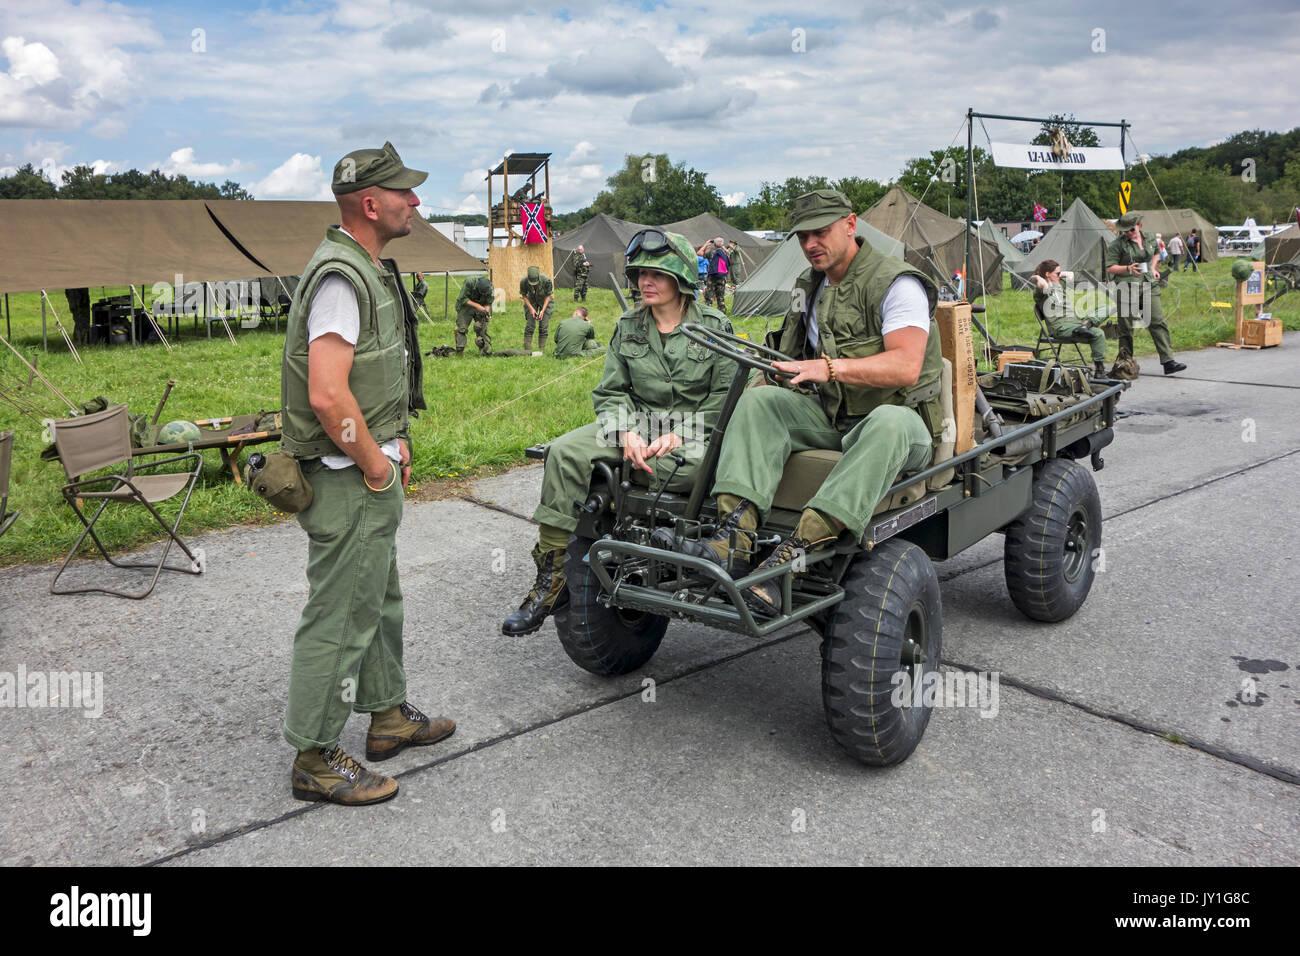 M274 Mechanical Mule and reenactors in US soldier outfits in military field camp during Vietnam War reenactment at militaria fair Stock Photo